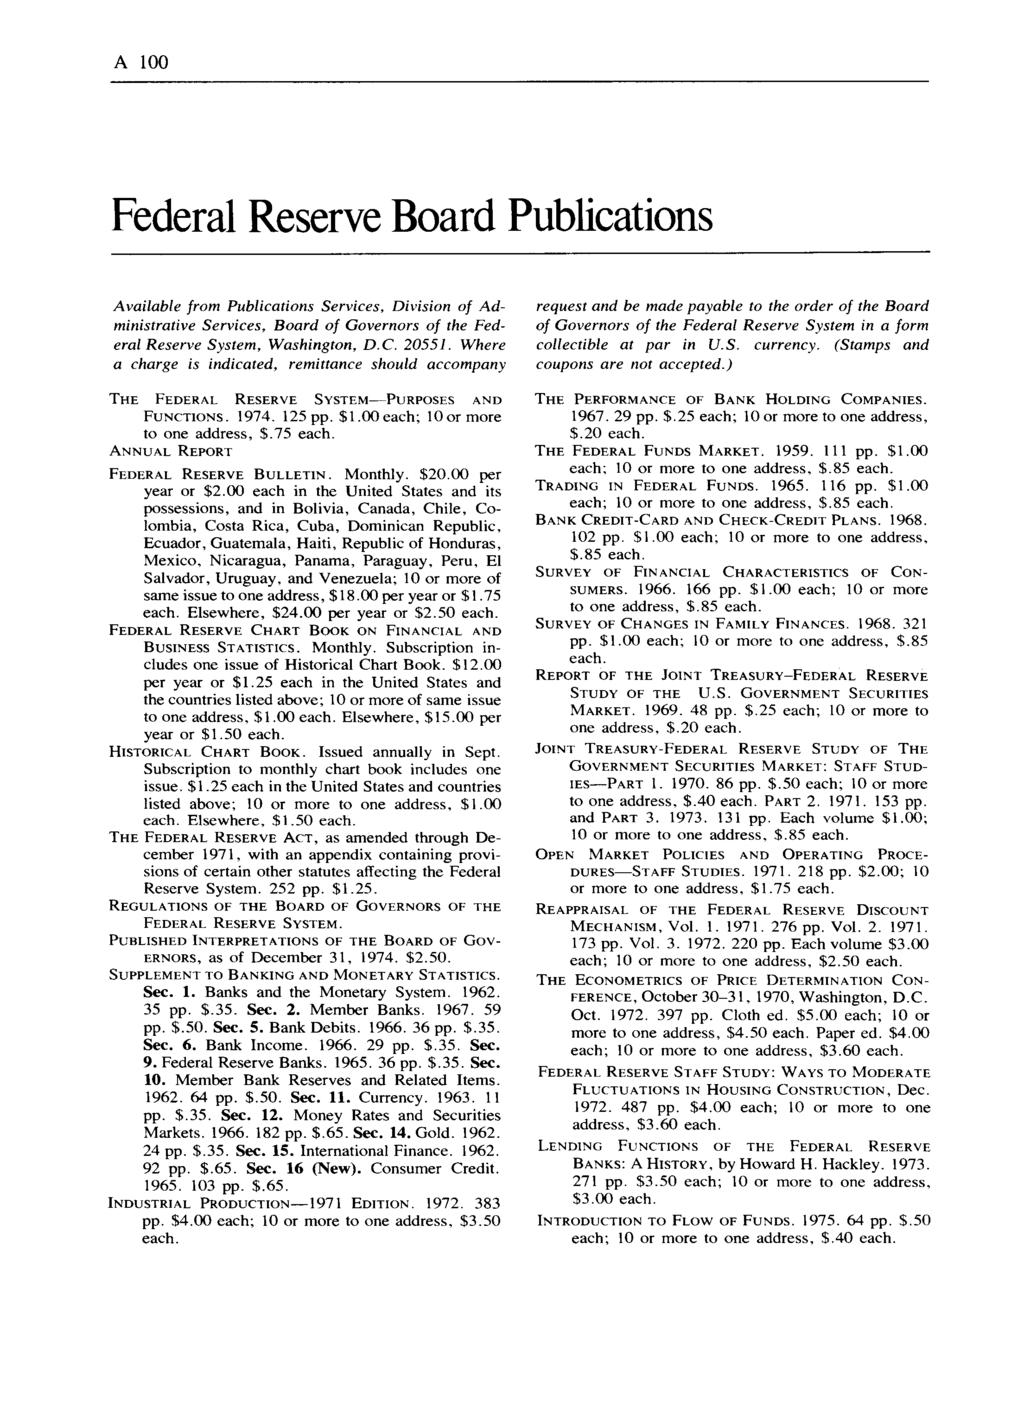 A 100 Federal Reserve Board Publications Available from Publications Services, Division of A d ministrative Services, B oard of Governors of the Federal Reserve System, W ashington, D.C. 20551.